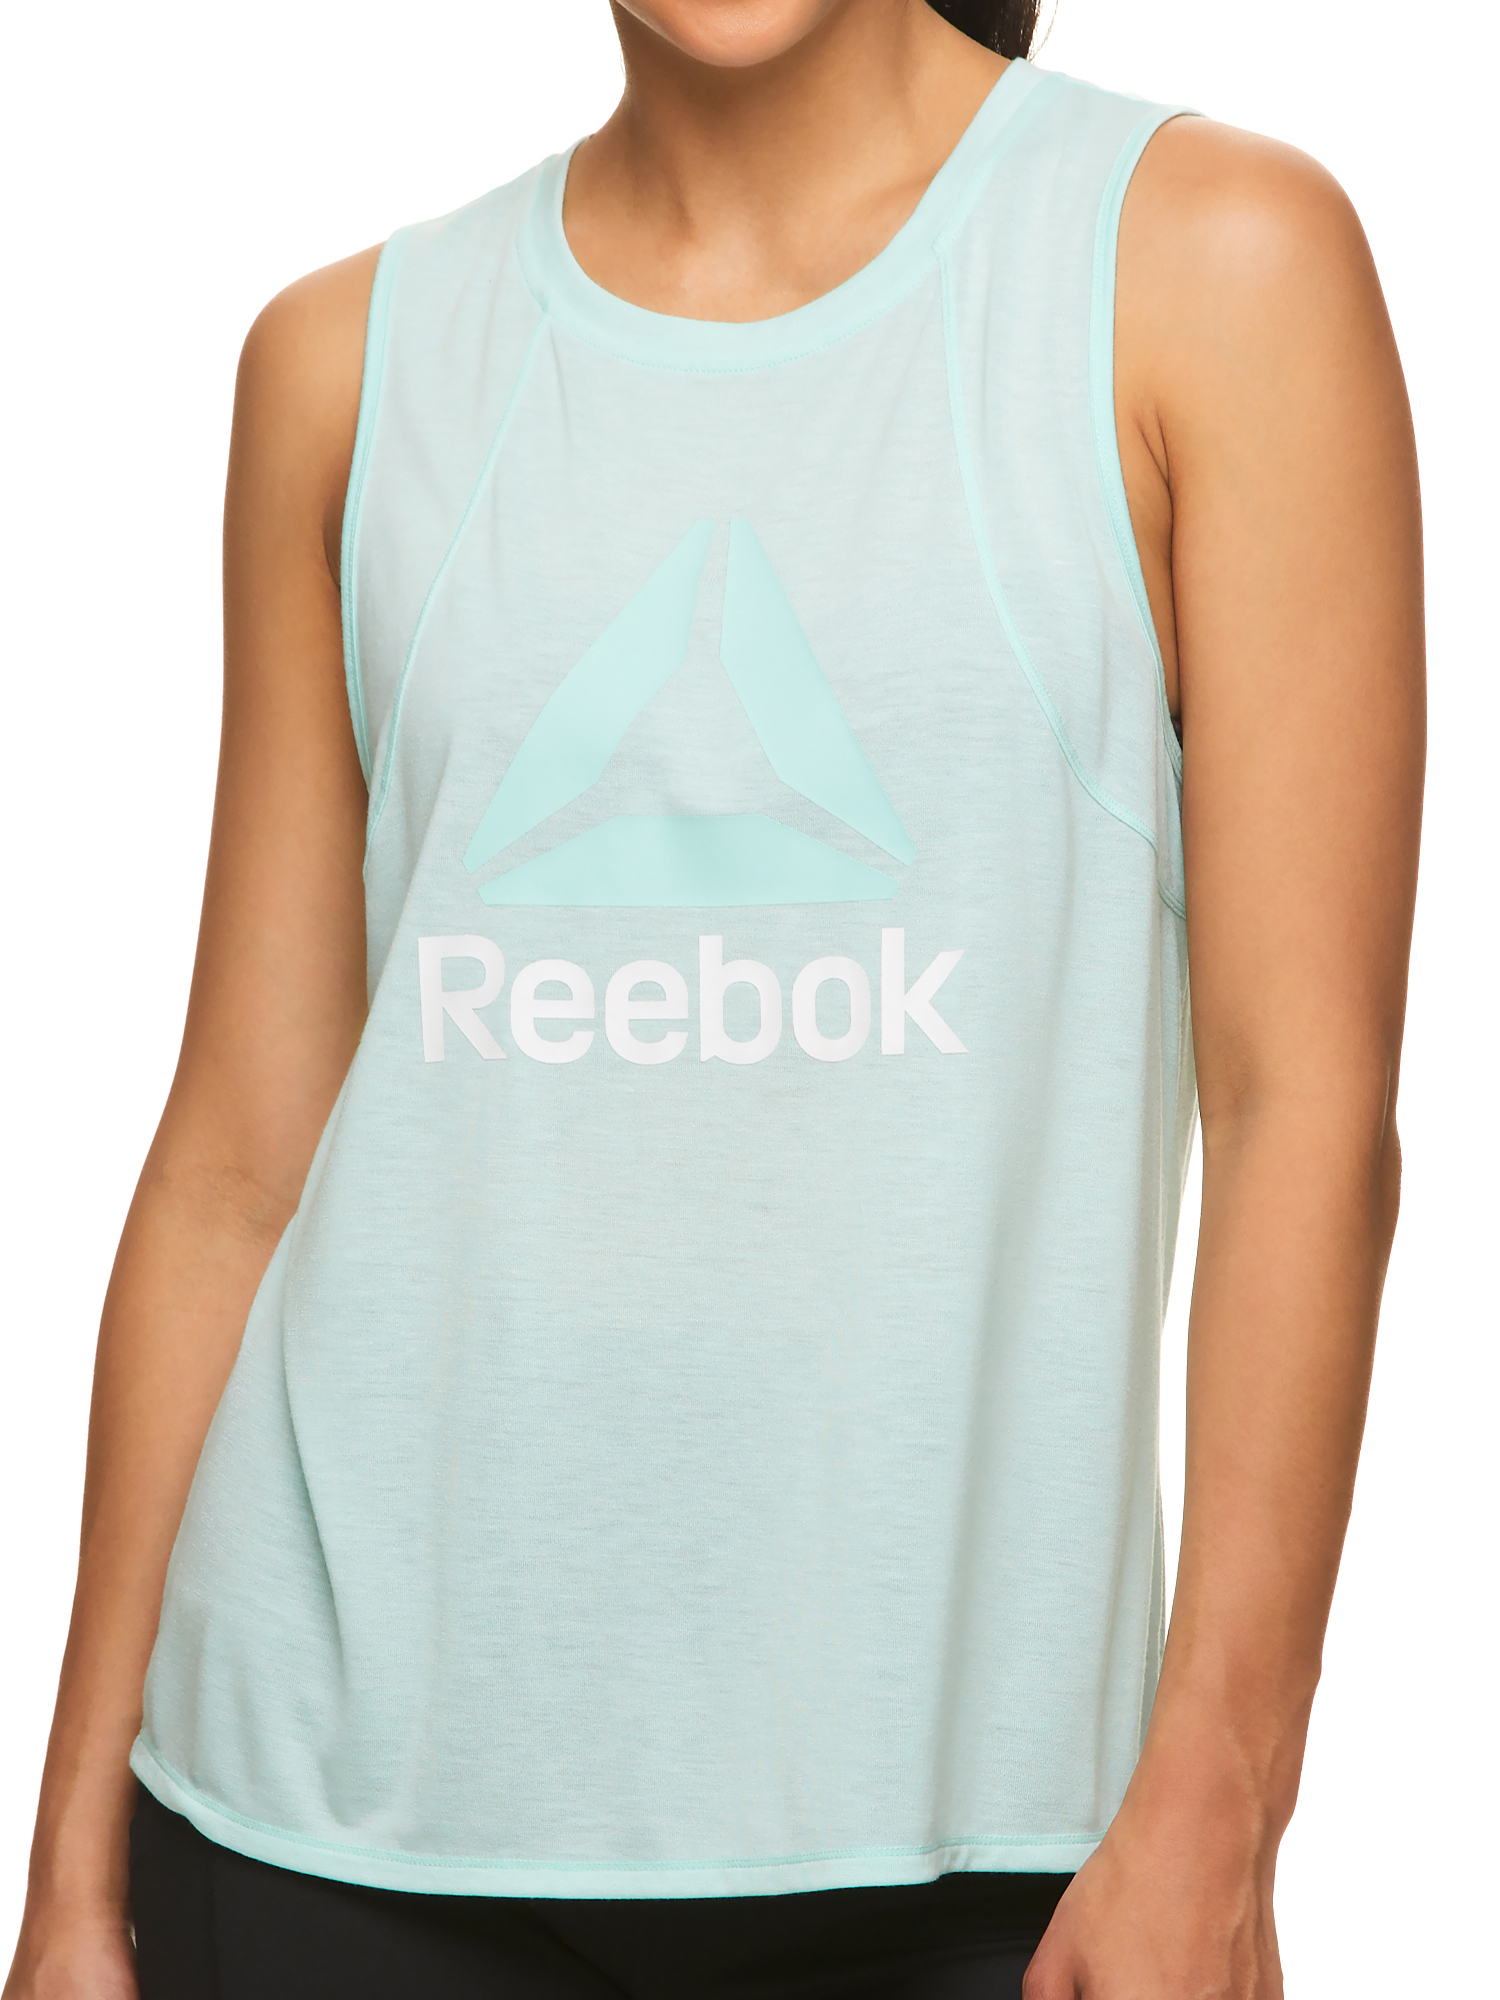 Reebok Womens Muscle Graphic Tank Top - image 3 of 4